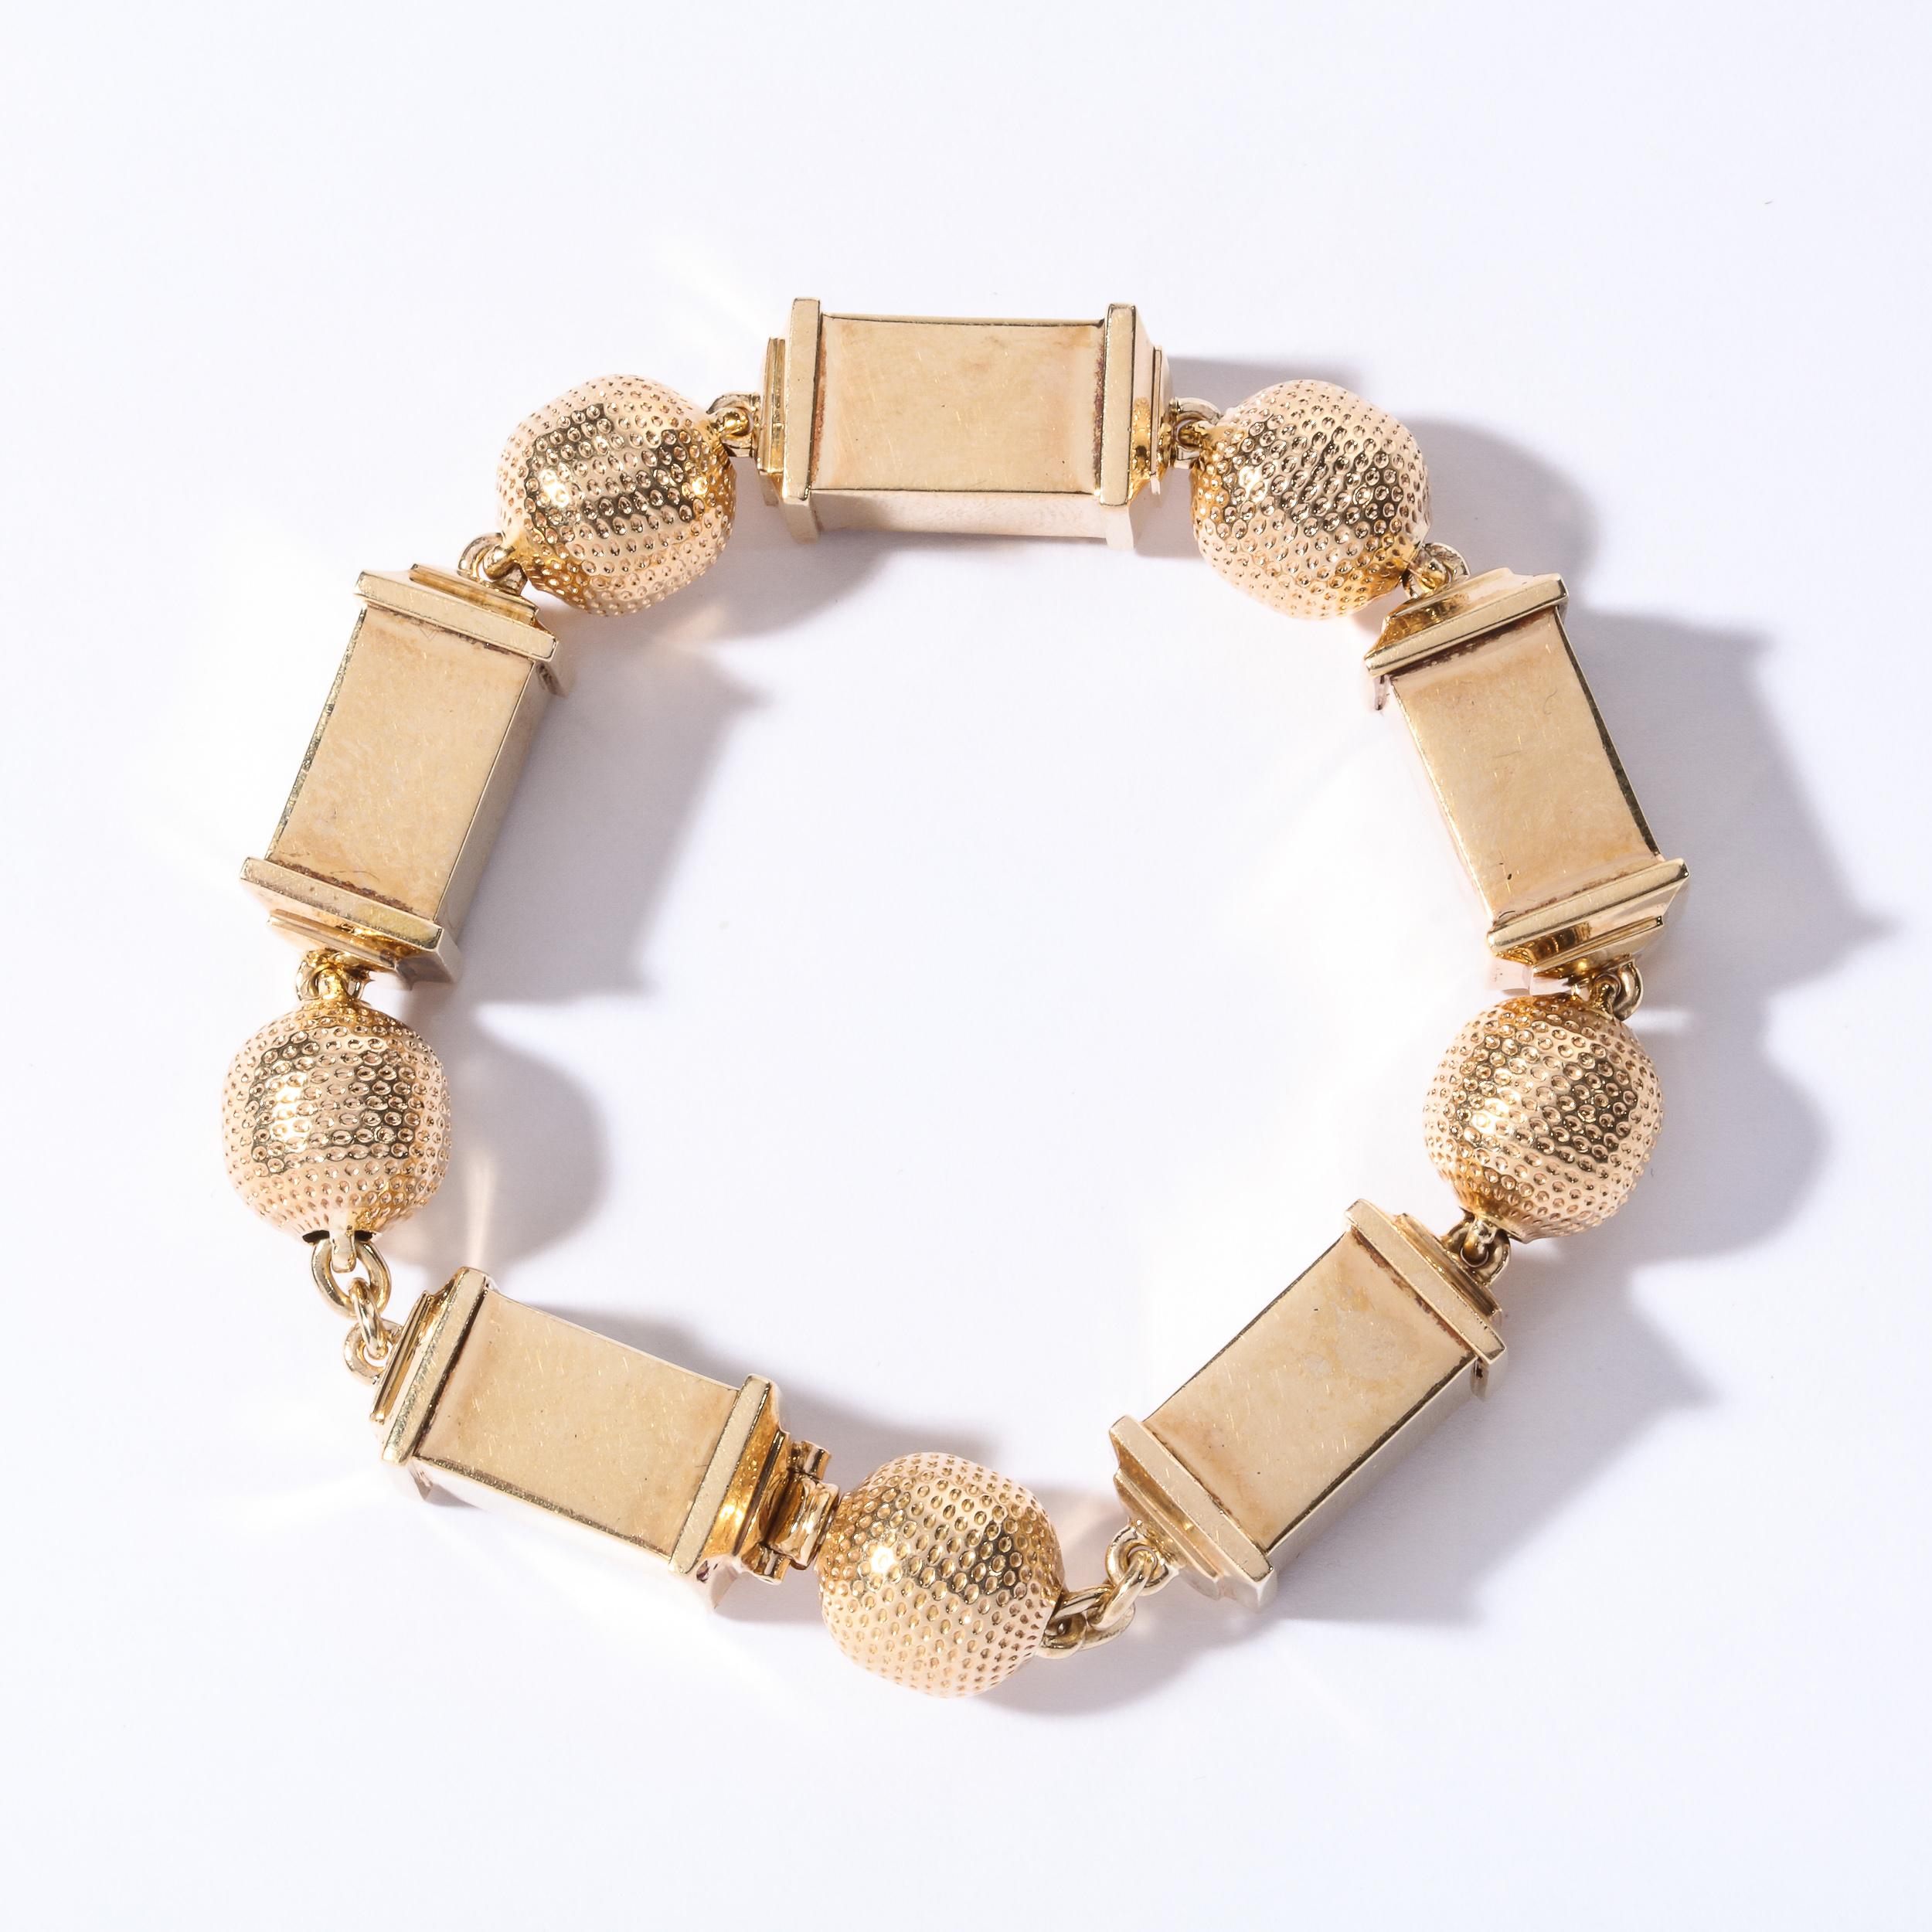 This stunning retro ruby, diamond and rose gold bracelet was realized in the United States, circa 1940. It offers contrasting geometric forms with an alternating ball and cylinder design. The ball has a dimple pattern design with alternating